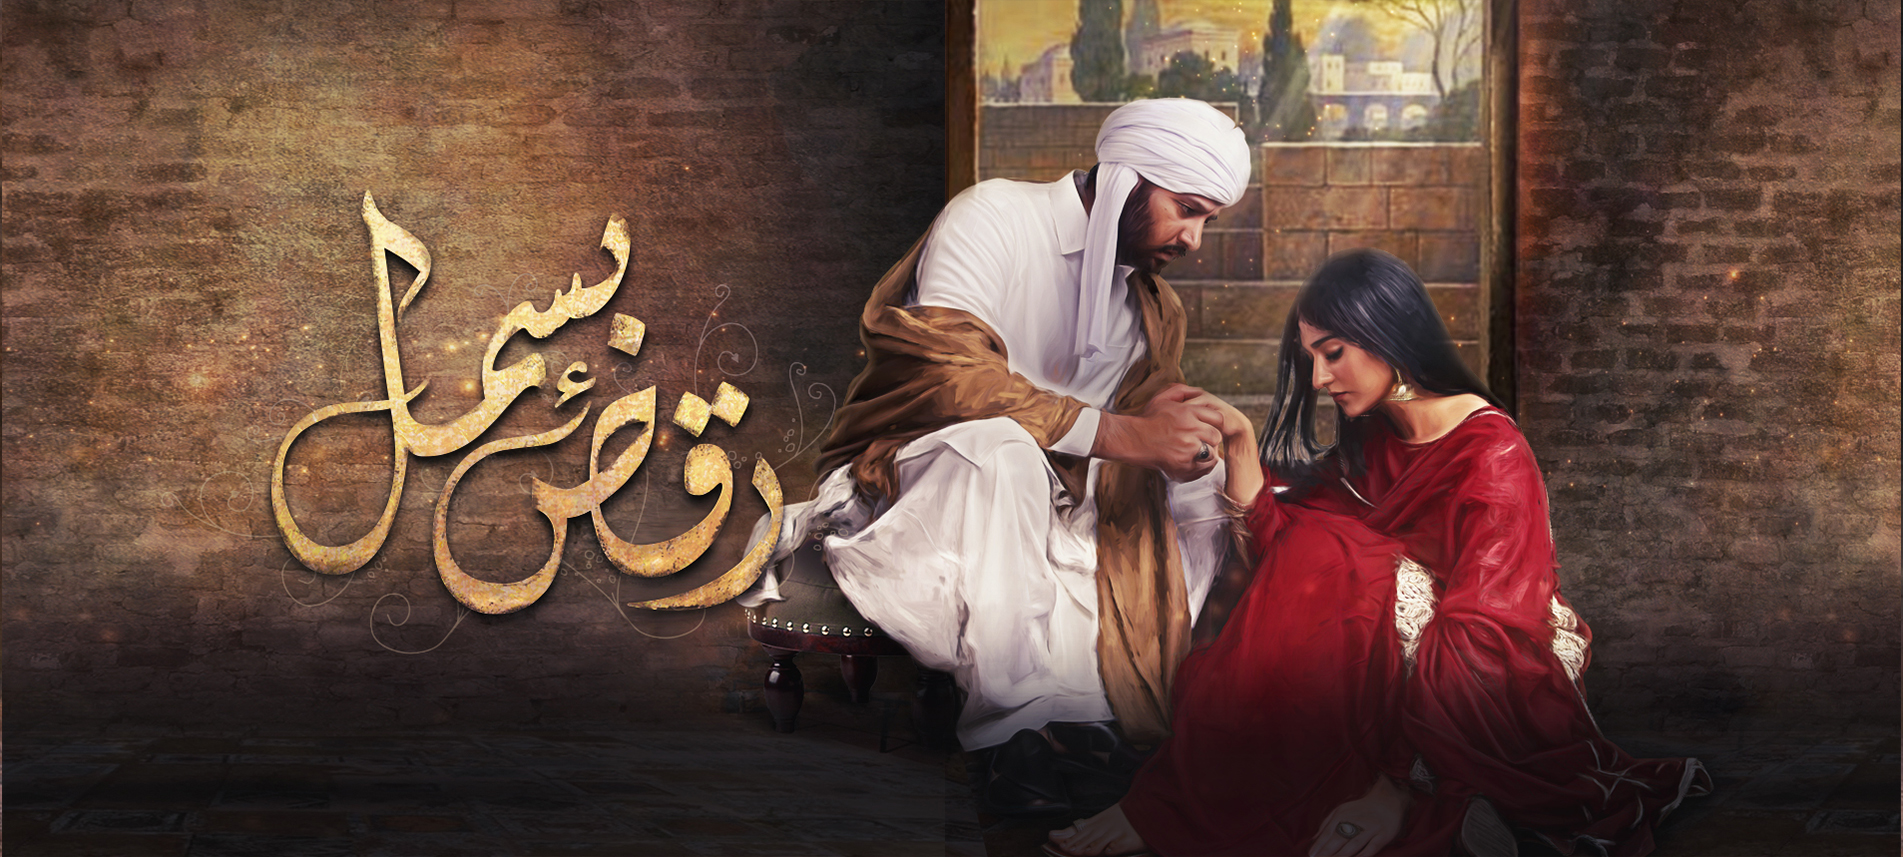 The new year has got something new and exciting for all of us to entertain us the best way. As we have watched an amazing range of drama serials in the year 2020, now here we have got a list of the best Pakistani dramas 2021 that you must watch. Some of these drama serials have already been going on-air while others are all set to hit the screens soon. The cast of these dramas, the story and the mesmerizing teasers, make it a complete package to increase our curiosity. Let's find out what we have on the list of the dramas for the year 2021. Here you go! Best Pakistani Dramas 2021 - Don't Miss! Here we have got the list of the best Pakistani dramas 2021 that you must not miss watching. Take a look at these details and watch the teasers! 1. Raqs-e-Bismil Raqs e Bismil Drama is one of that most awaited drama serial which went viral on social media before it made it to the screen. The drama is starring Sarah Khan and Imran Ashraf. The brilliant actors have paired up for the first time in any drama serial. Raqs e Bismil is directed by Wajahat Rauf. The different looks of Imran Ashraf and Sarah Khan, was something that intrigued fans to watch this drama. Moreover, Zara Sheikh is also making a comeback with this play and everyone is excited to see her on the screen again. Raqs-e-Bismal goes on air at HUM TV on every Friday at 08:00 PM. 2. Dunk Another drama that was making rounds over the internet with some of its pictures and video clips, Dunk is finally on-air now. Although the theme of this drama looked quite familiar as it depicted the story is about harassment case. Well... as it went on-air, the guesses proved right while most of the viewers had a thought that it is a combined version of drama serial Ruswai and Cheekh.  However, it is a must-watch as Bilal Abbas, Sana Javed, Nauman Ejaz and others have made it interesting with their acting. So, watch it every Wednesday at 08:00 PM on ARY Digital.  3. Khuda Aur Mohabbat 3 Khuda Aur Mohabbat is one of the most famous drama series that has got a special love from the fans. This year, we will be having the treat of Khuda Aur Mohabbat 3 and fans are already very excited. The main cast of this drama includes Feroze Khan and Iqra Aziz. The drama will be going on-air at Geo Entertainment. Khuda Aur Mohabbat third part is directed by Wajahat Hussain and written by Hashim Nadeem while it is the production of Abdullah Kadwani and Asad Qureshi. Feroze will be playing a confident young boy from a lower-middle-class background, who falls in love. This love story is said to fall into the realm of romance and spirituality. 4. Raqeeb Se So, this upcoming drama serial has been taking the internet by storm. The main reason is the cast of this drama as everyone is excited to see Hadiqa Kiani making her debut in acting. No one ever expected that the legendary singer Hadiqa would be making a try in acting, however, the teaser of drama shows she is going to do wonders.  The story seems to be a love triangle with a traditional theme that is adding up a witty element to the story plot. We are all so anxious to watch it as it will be going on-air on HUM TV. The main cast includes Nauman Ejaz, Sania Saeed, Hadiqa Kiani, Iqra Aziz, and Faryal Mehmood.  5. Pehli Si Mohabbat The most fantasizing love story is on the way to screen with Maya Ali and Sheheryar Munawar in the lead roles. As soon as its teaser made way to social media, everyone is interested in watching a romantic love story with pure traditional plot after so long. Hassan Sheheryar Yasin aka HSY is making his debut in acting through this drama serial. Maya has always proved herself a brilliant actress and this teaser has portrayed her perfect in all aspects. Similarly, Sheheryar Munawar has emerged as a fantastic actor and this teaser is enough to prove it right. The drama will be going on-Air at ARY Digital. 6. Phaans Phaans is based on a different story and its teaser has put us on ignition mode that we are anxiously waiting for it to go on air. The entirely different look of Shahzad Sheikh has changed the overall appeal of this drama serial. Moreover, Zara Noor Abbas is also playing a significant role in this play and we can also see Sami Khan in the teaser. This drama serial will also be going on air on HUM TV. Watch the teaser! So, it's time to update your watchlist and add these amazing new entertainment packages that are going on-air and those that are soon to hit the screens. Don't forget to share your feedback with us!